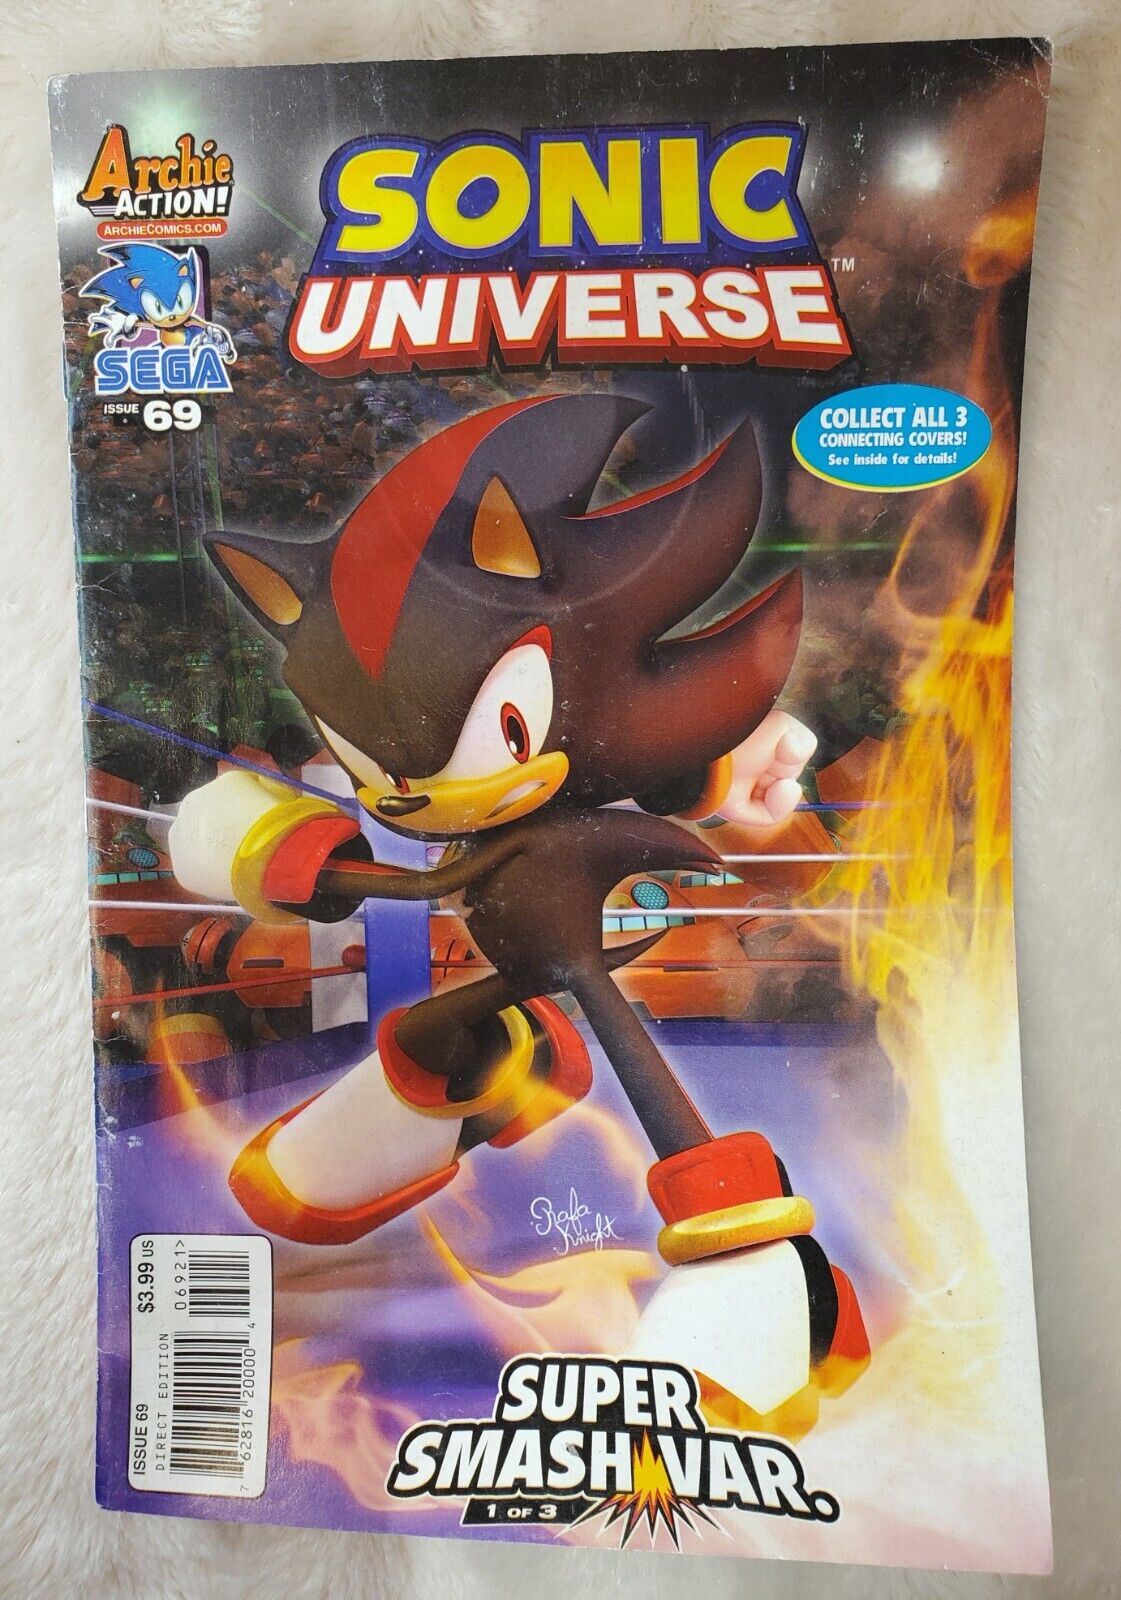 Sonic Universe: Archie Action Issue 69 1 of 3 Super Smash Var.